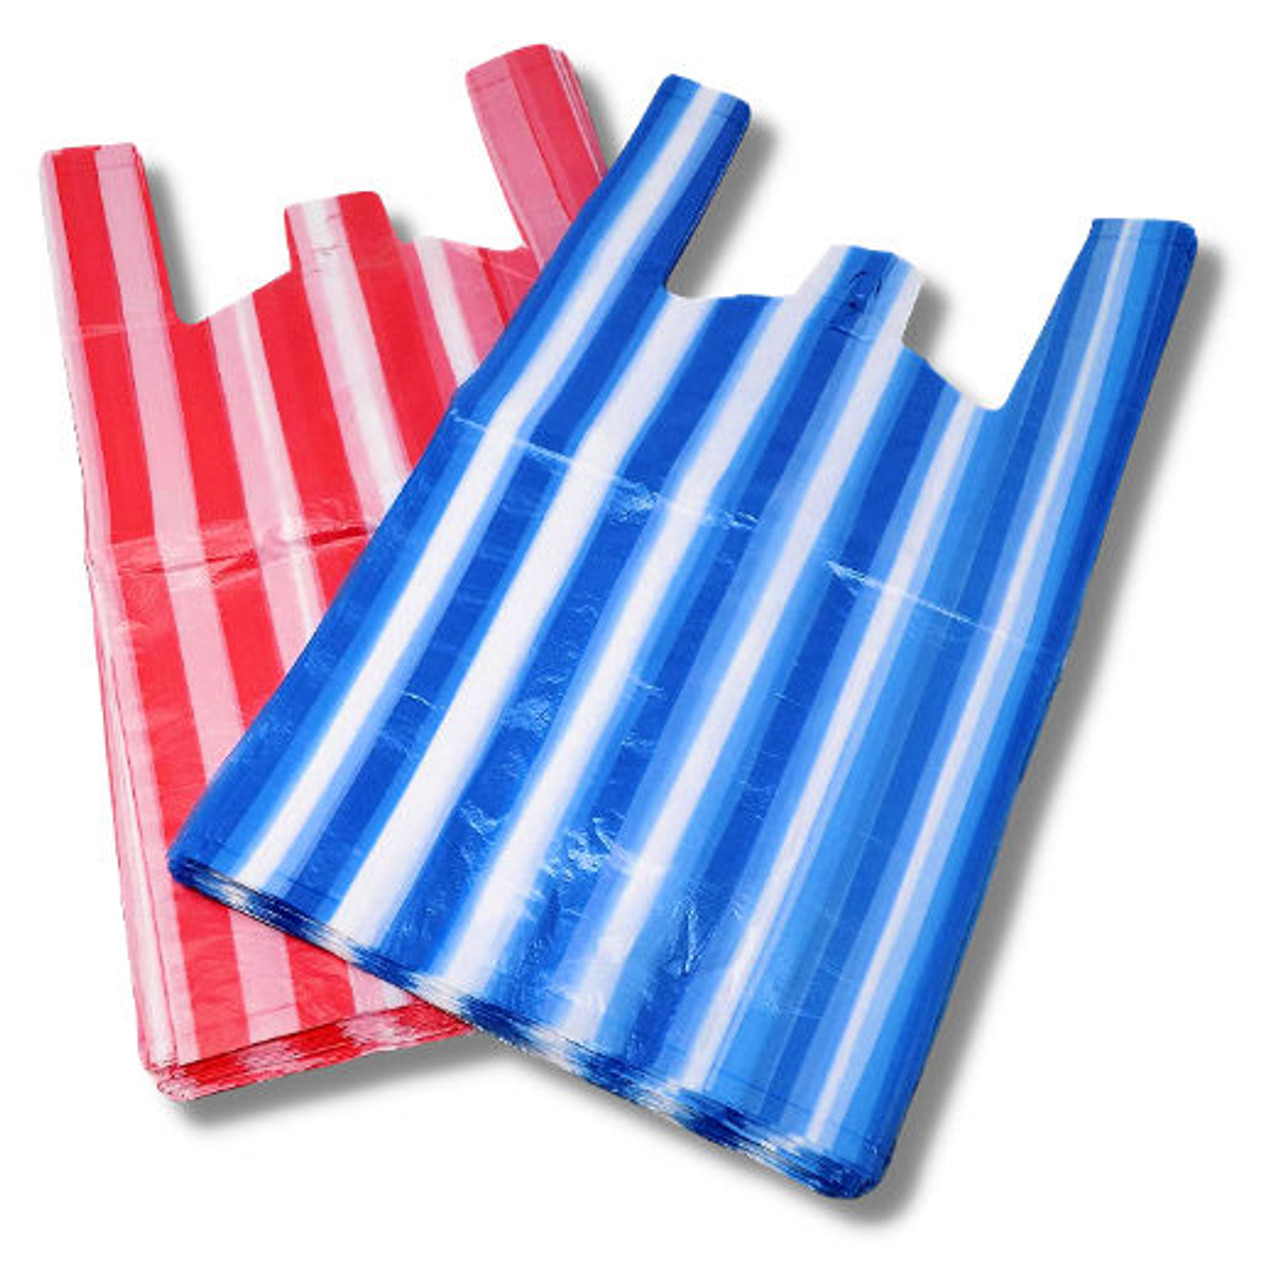 10"x 15"x 18" Candy Stripe high density Vest Carriers Pack x 100